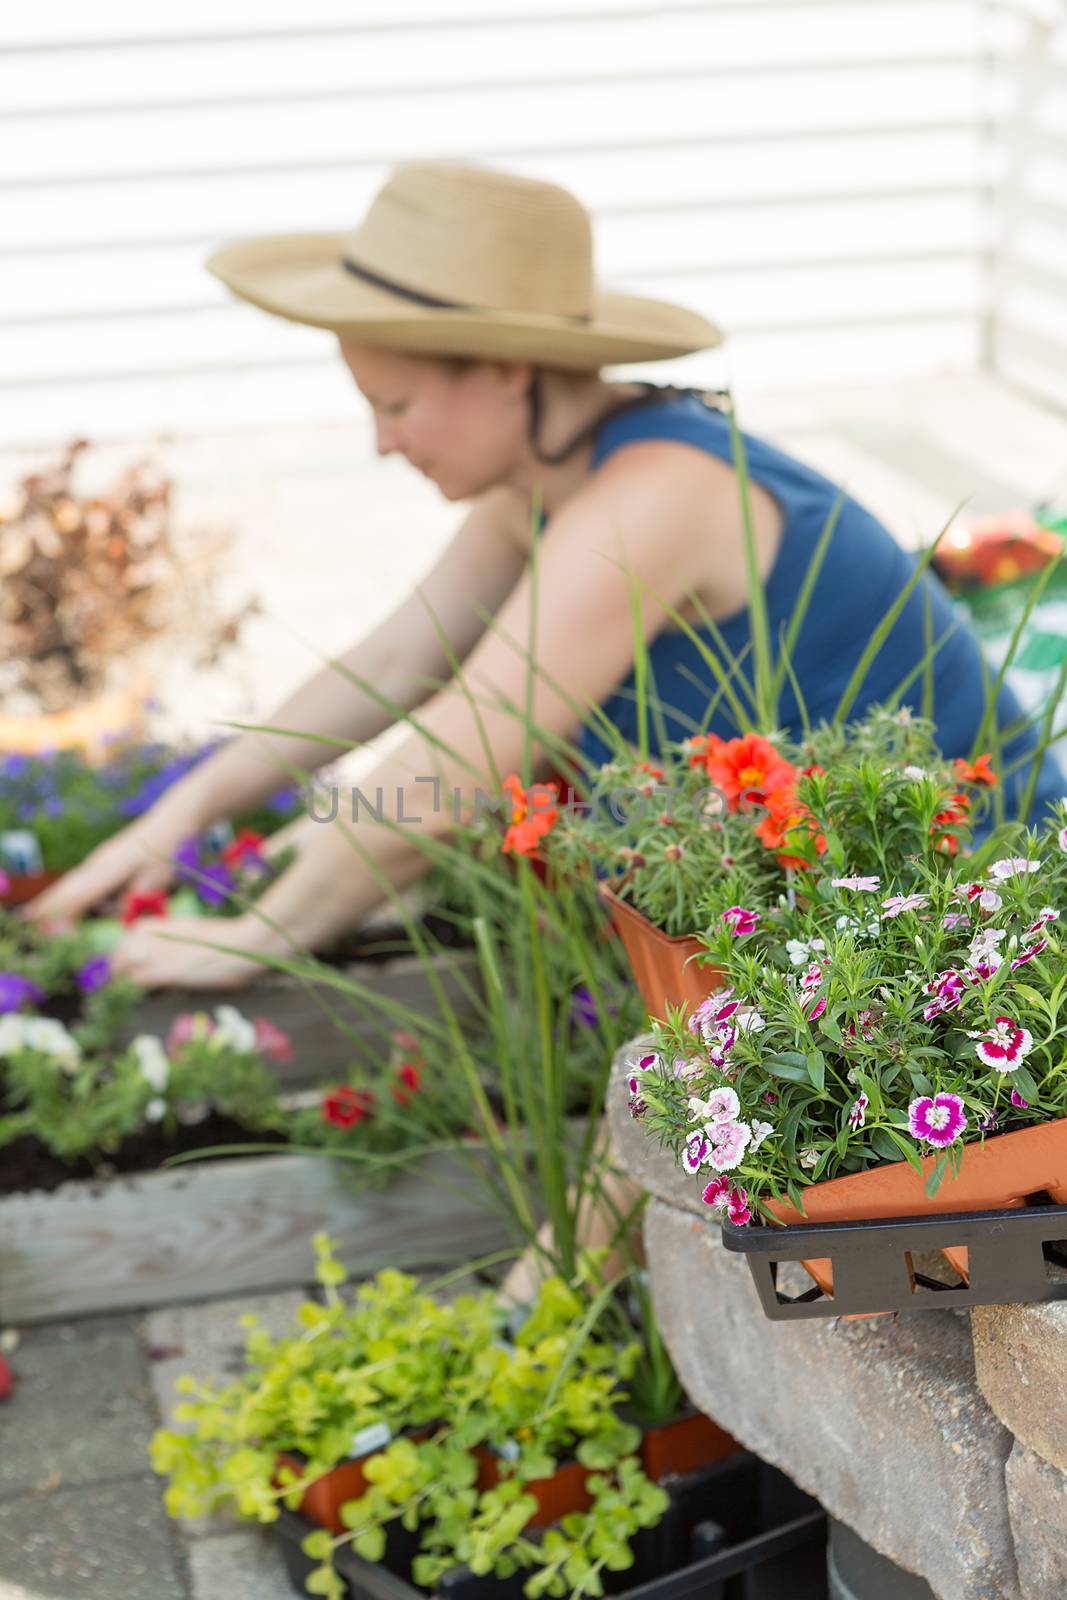 Woman potting plants and nursery seedlings into decorative flowerpots on a hot spring day sitting in the shade on her outdoor patio as she works, view past colorful flowers